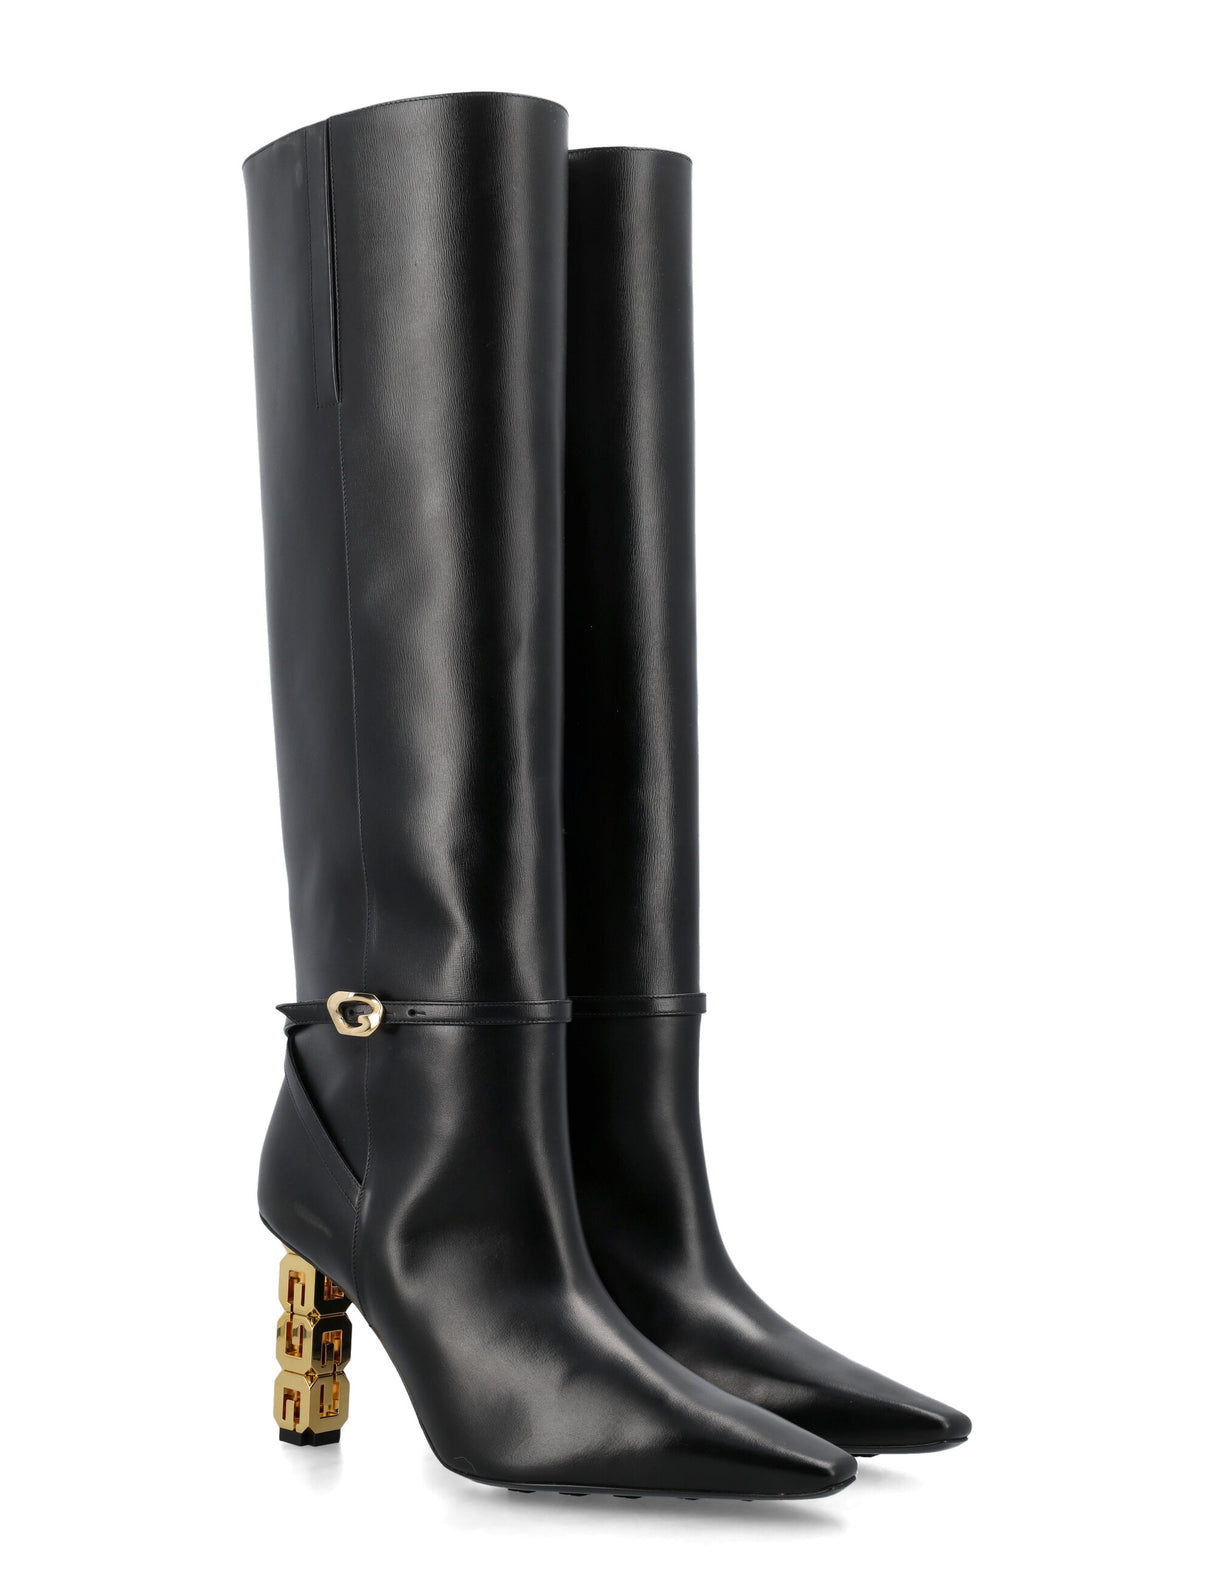 Black Leather High Boots with Gold G Logo